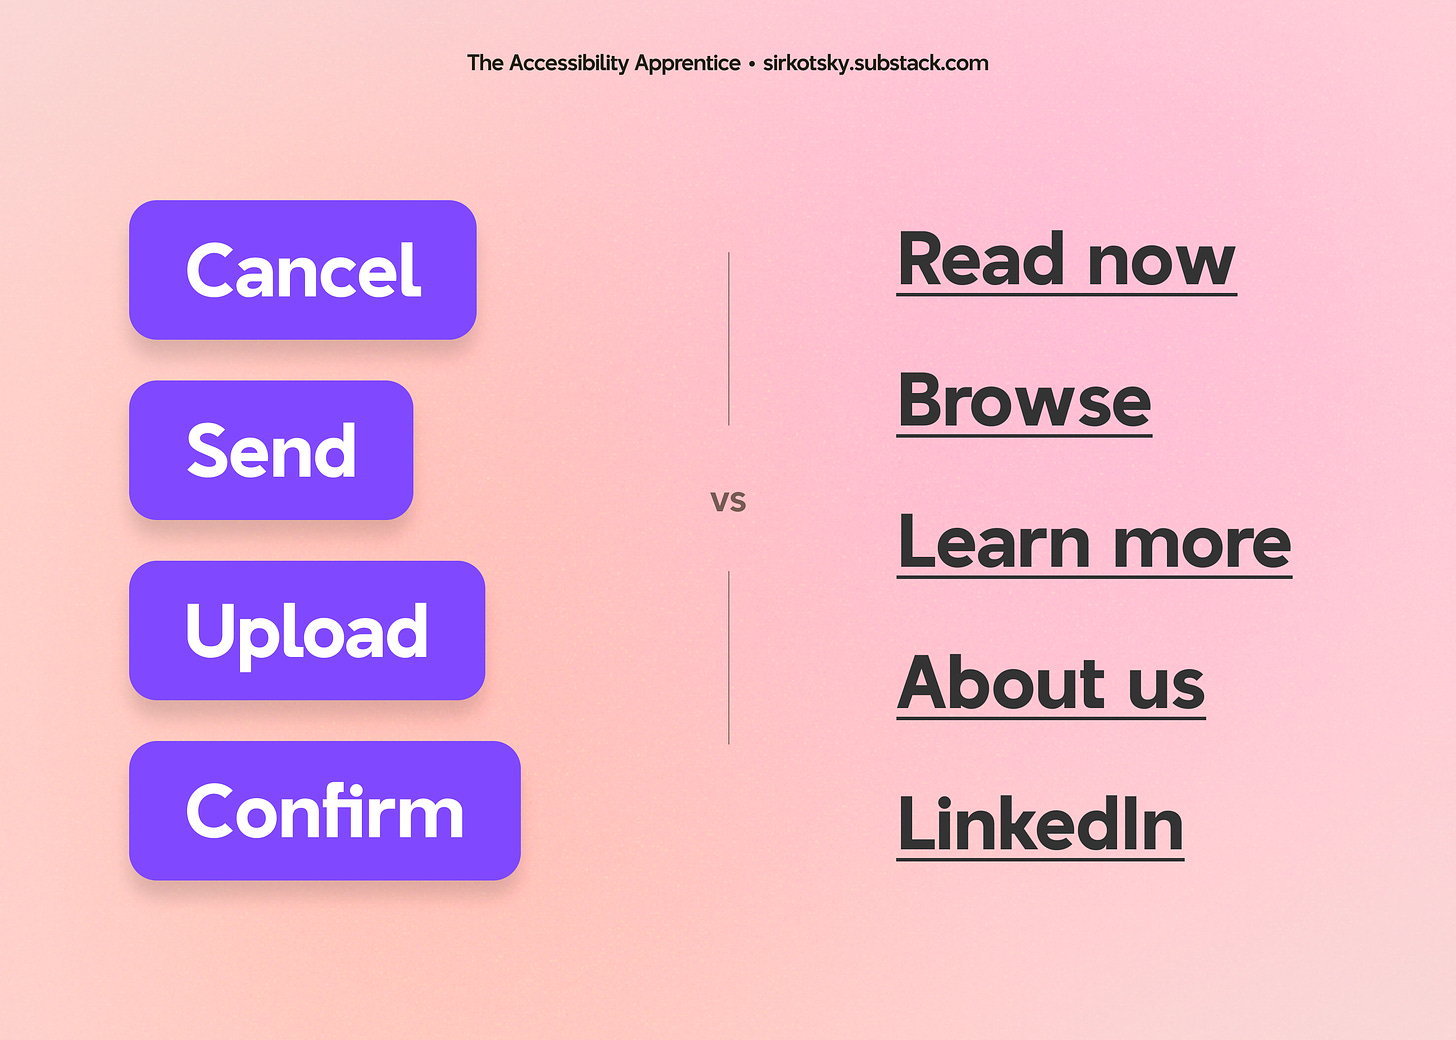 On the left, 4 primary buttons: "Cancel", "Send", "Upload", and "Confirm". On the left, links: "Read now", "Browse", "Learn more", "About us", "LinkedIn"